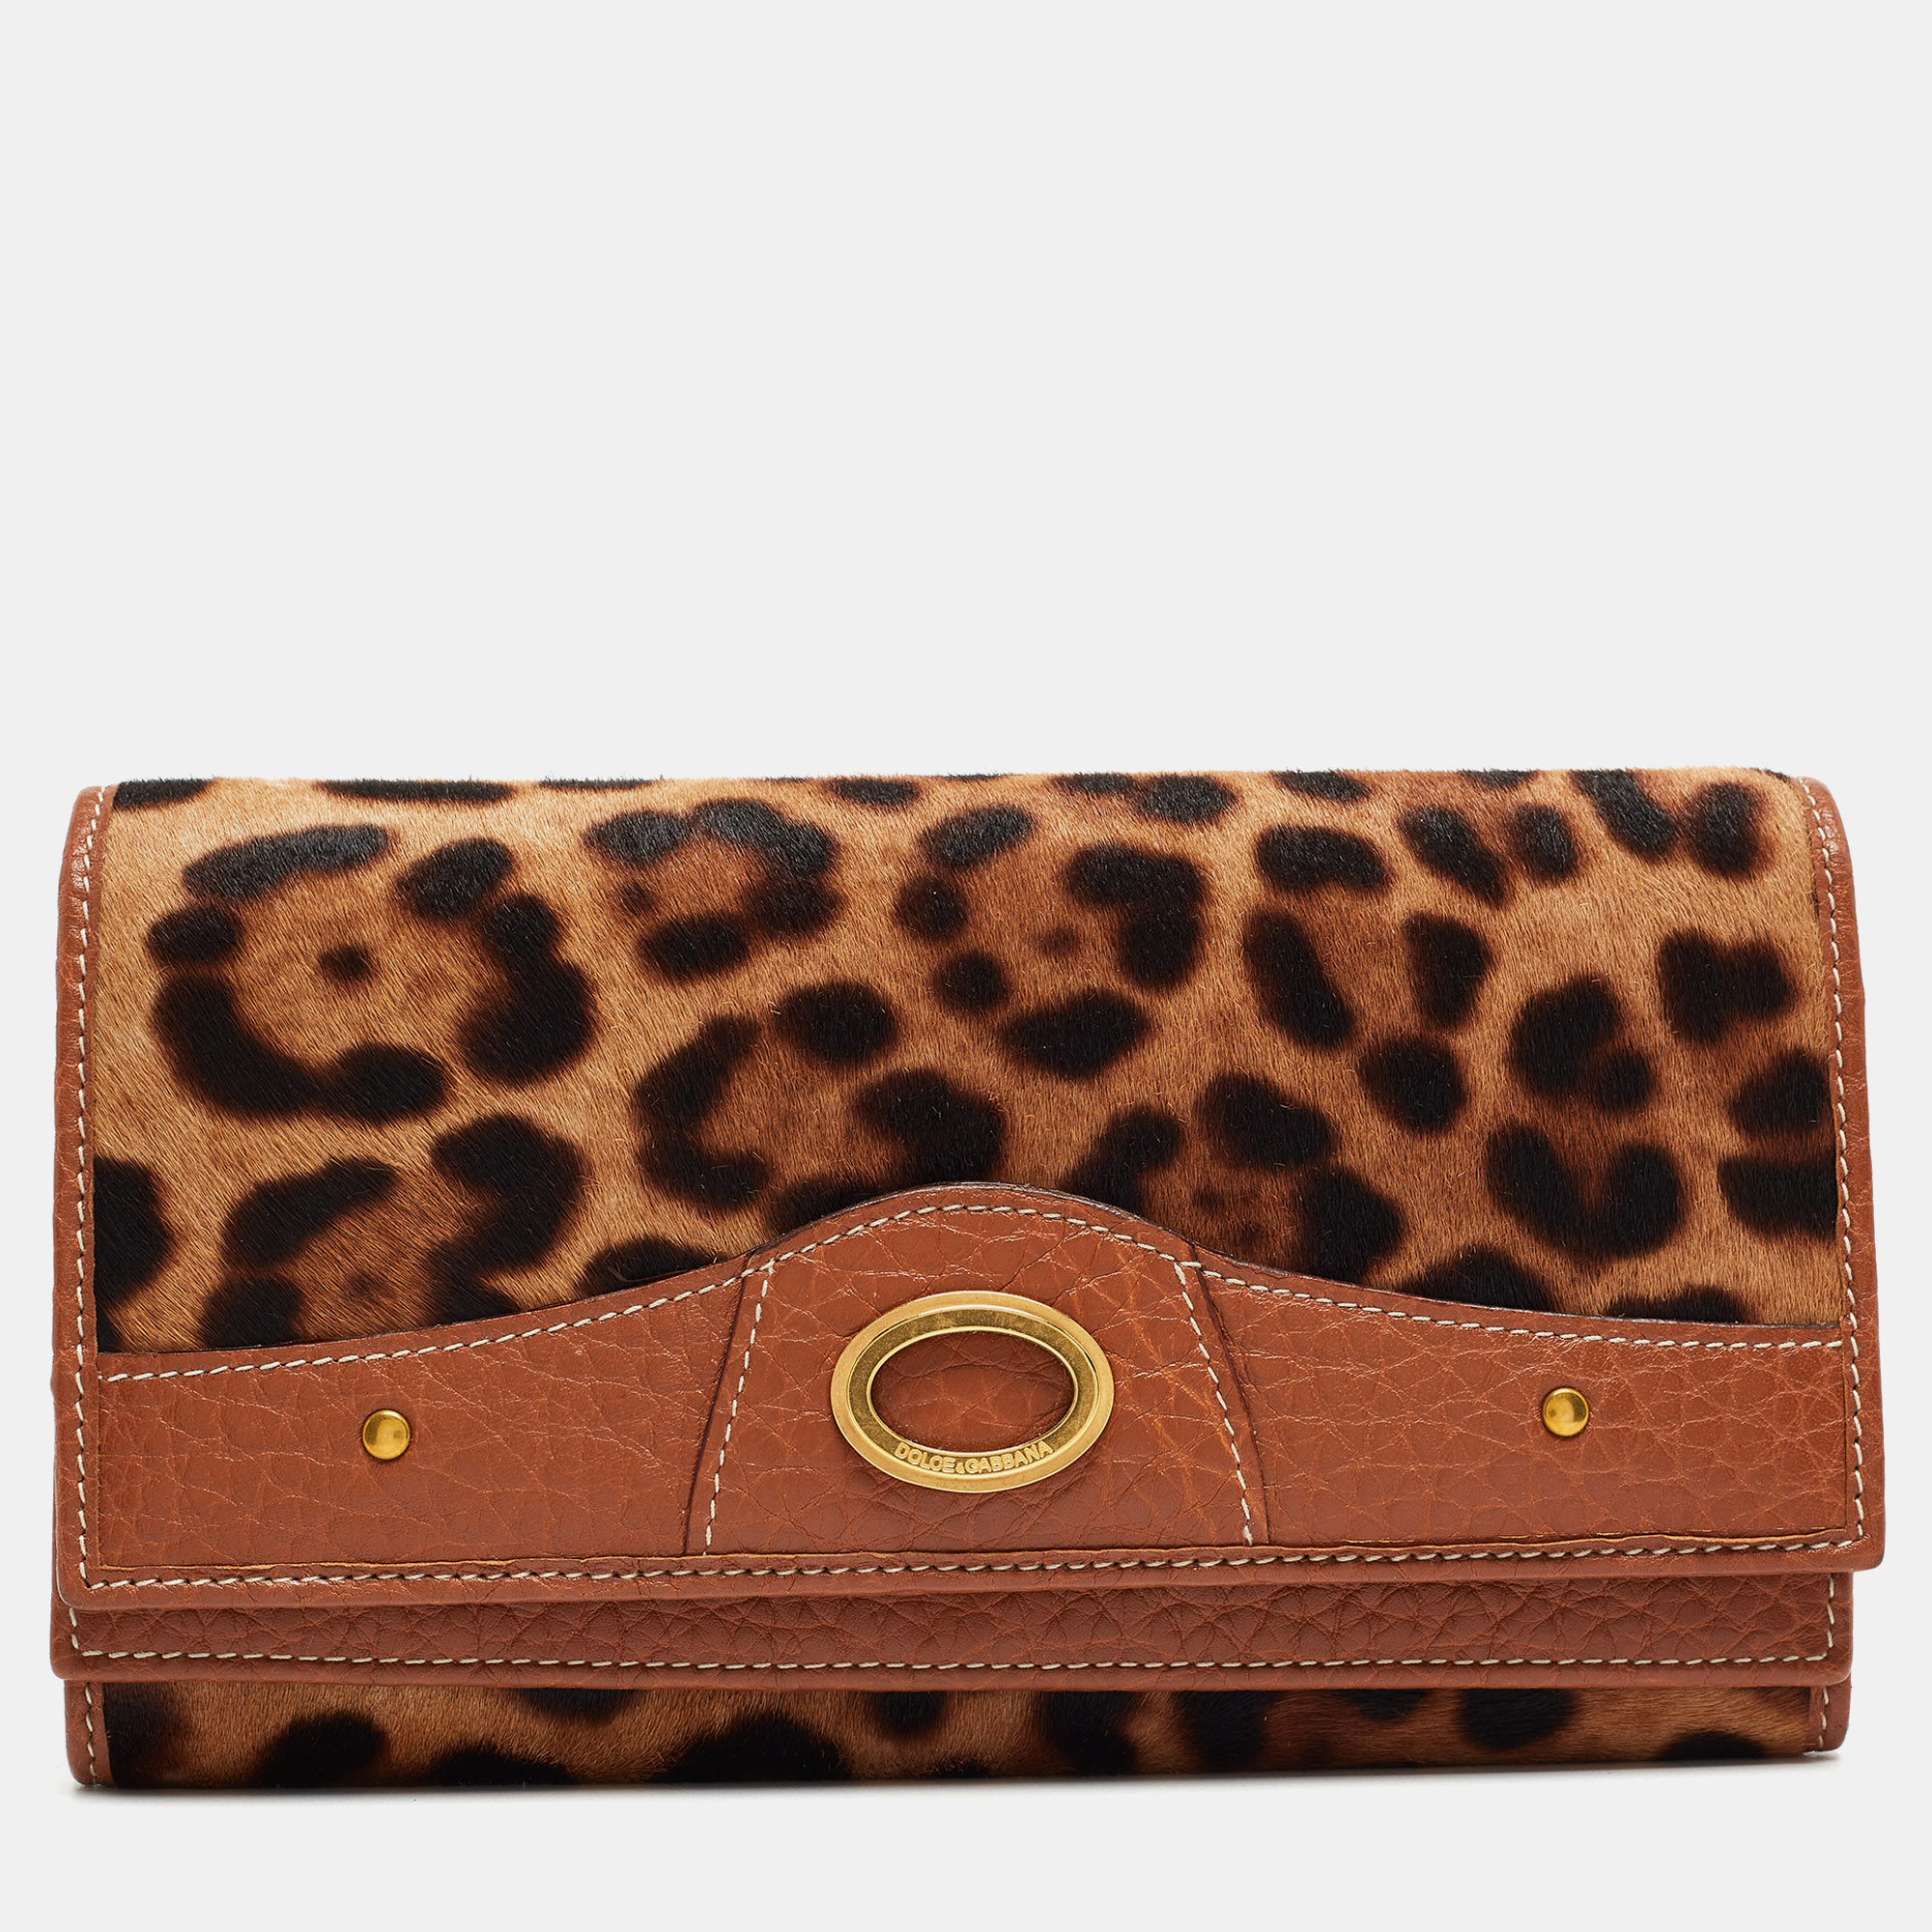 Dolce & gabbana brown/beige leopard print calfhair and leather double flap continental wallet